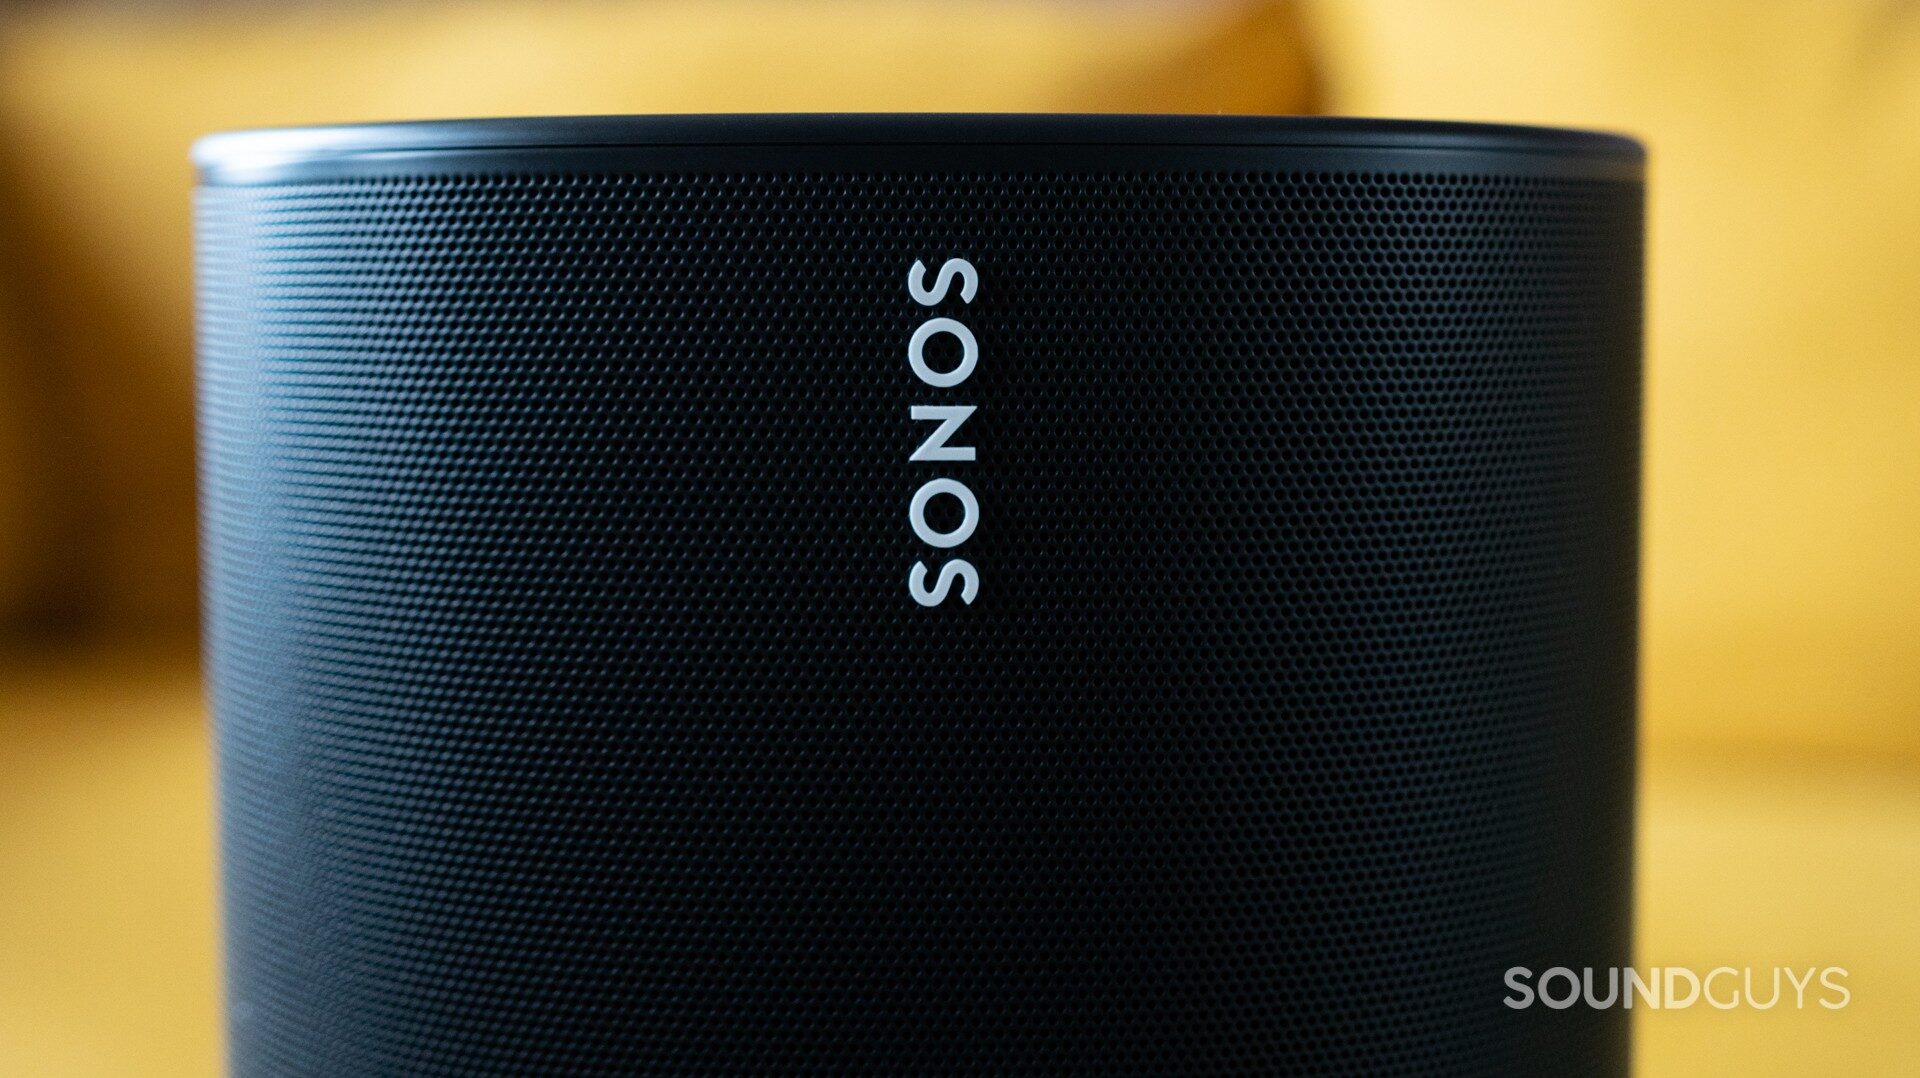  Sonos Move - Battery-Powered Smart Speaker, Wi-Fi and